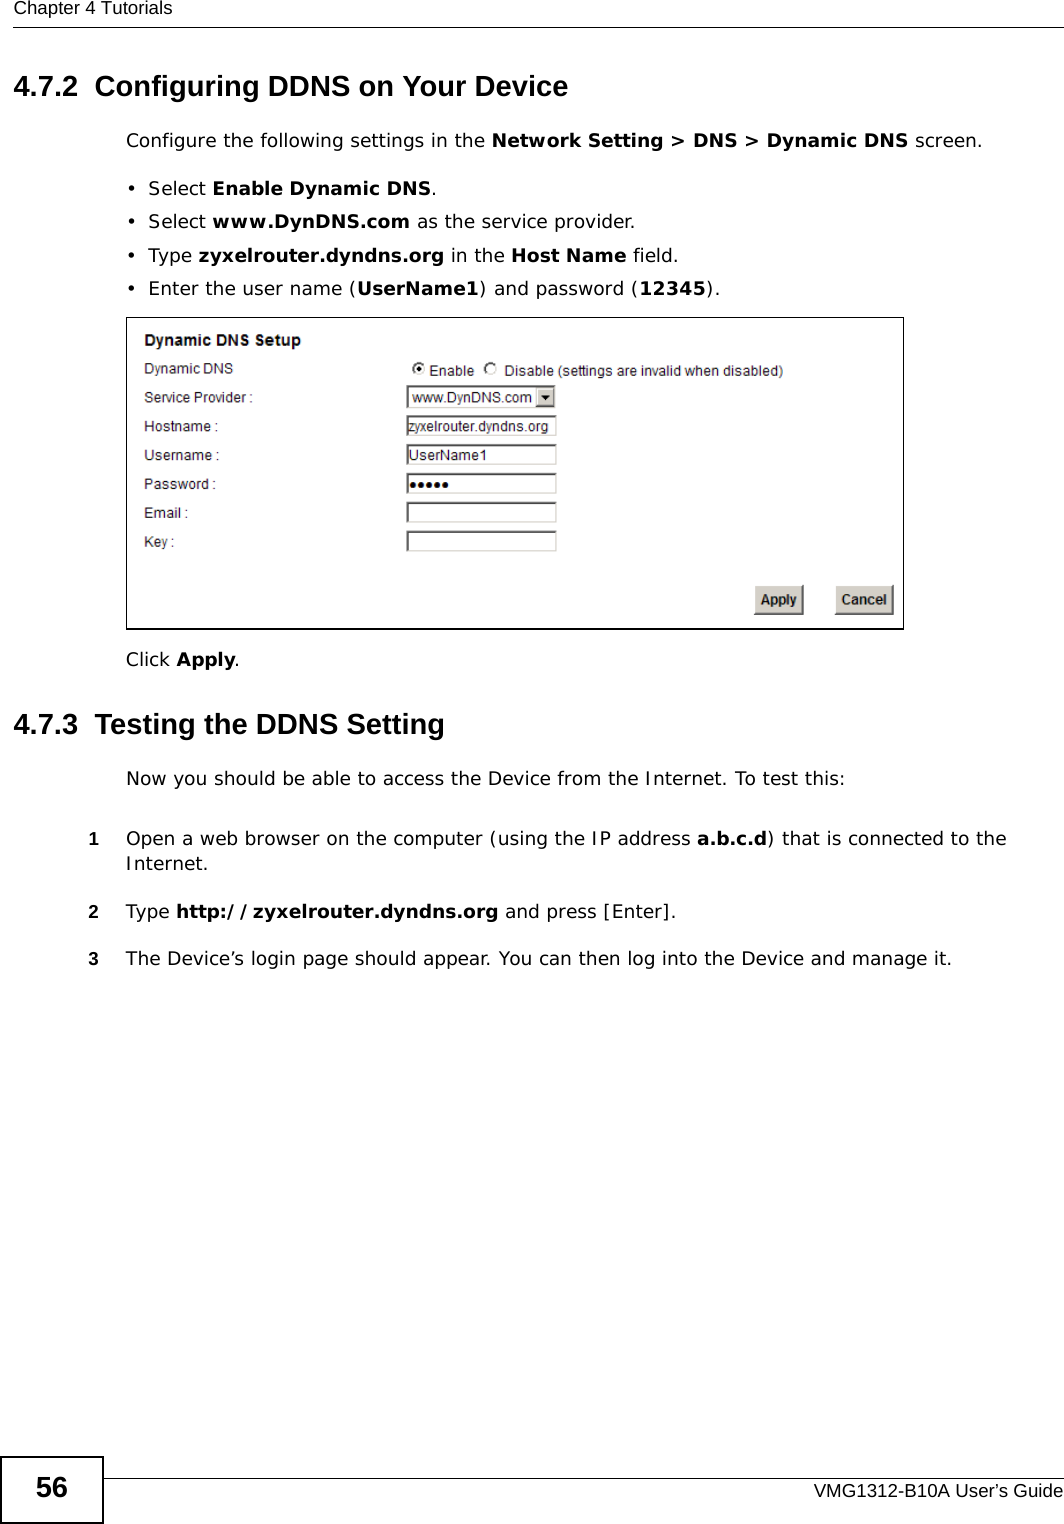 Chapter 4 TutorialsVMG1312-B10A User’s Guide564.7.2  Configuring DDNS on Your DeviceConfigure the following settings in the Network Setting &gt; DNS &gt; Dynamic DNS screen.•Select Enable Dynamic DNS.•Select www.DynDNS.com as the service provider.•Type zyxelrouter.dyndns.org in the Host Name field.• Enter the user name (UserName1) and password (12345).Click Apply.4.7.3  Testing the DDNS SettingNow you should be able to access the Device from the Internet. To test this:1Open a web browser on the computer (using the IP address a.b.c.d) that is connected to the Internet.2Type http://zyxelrouter.dyndns.org and press [Enter].3The Device’s login page should appear. You can then log into the Device and manage it.